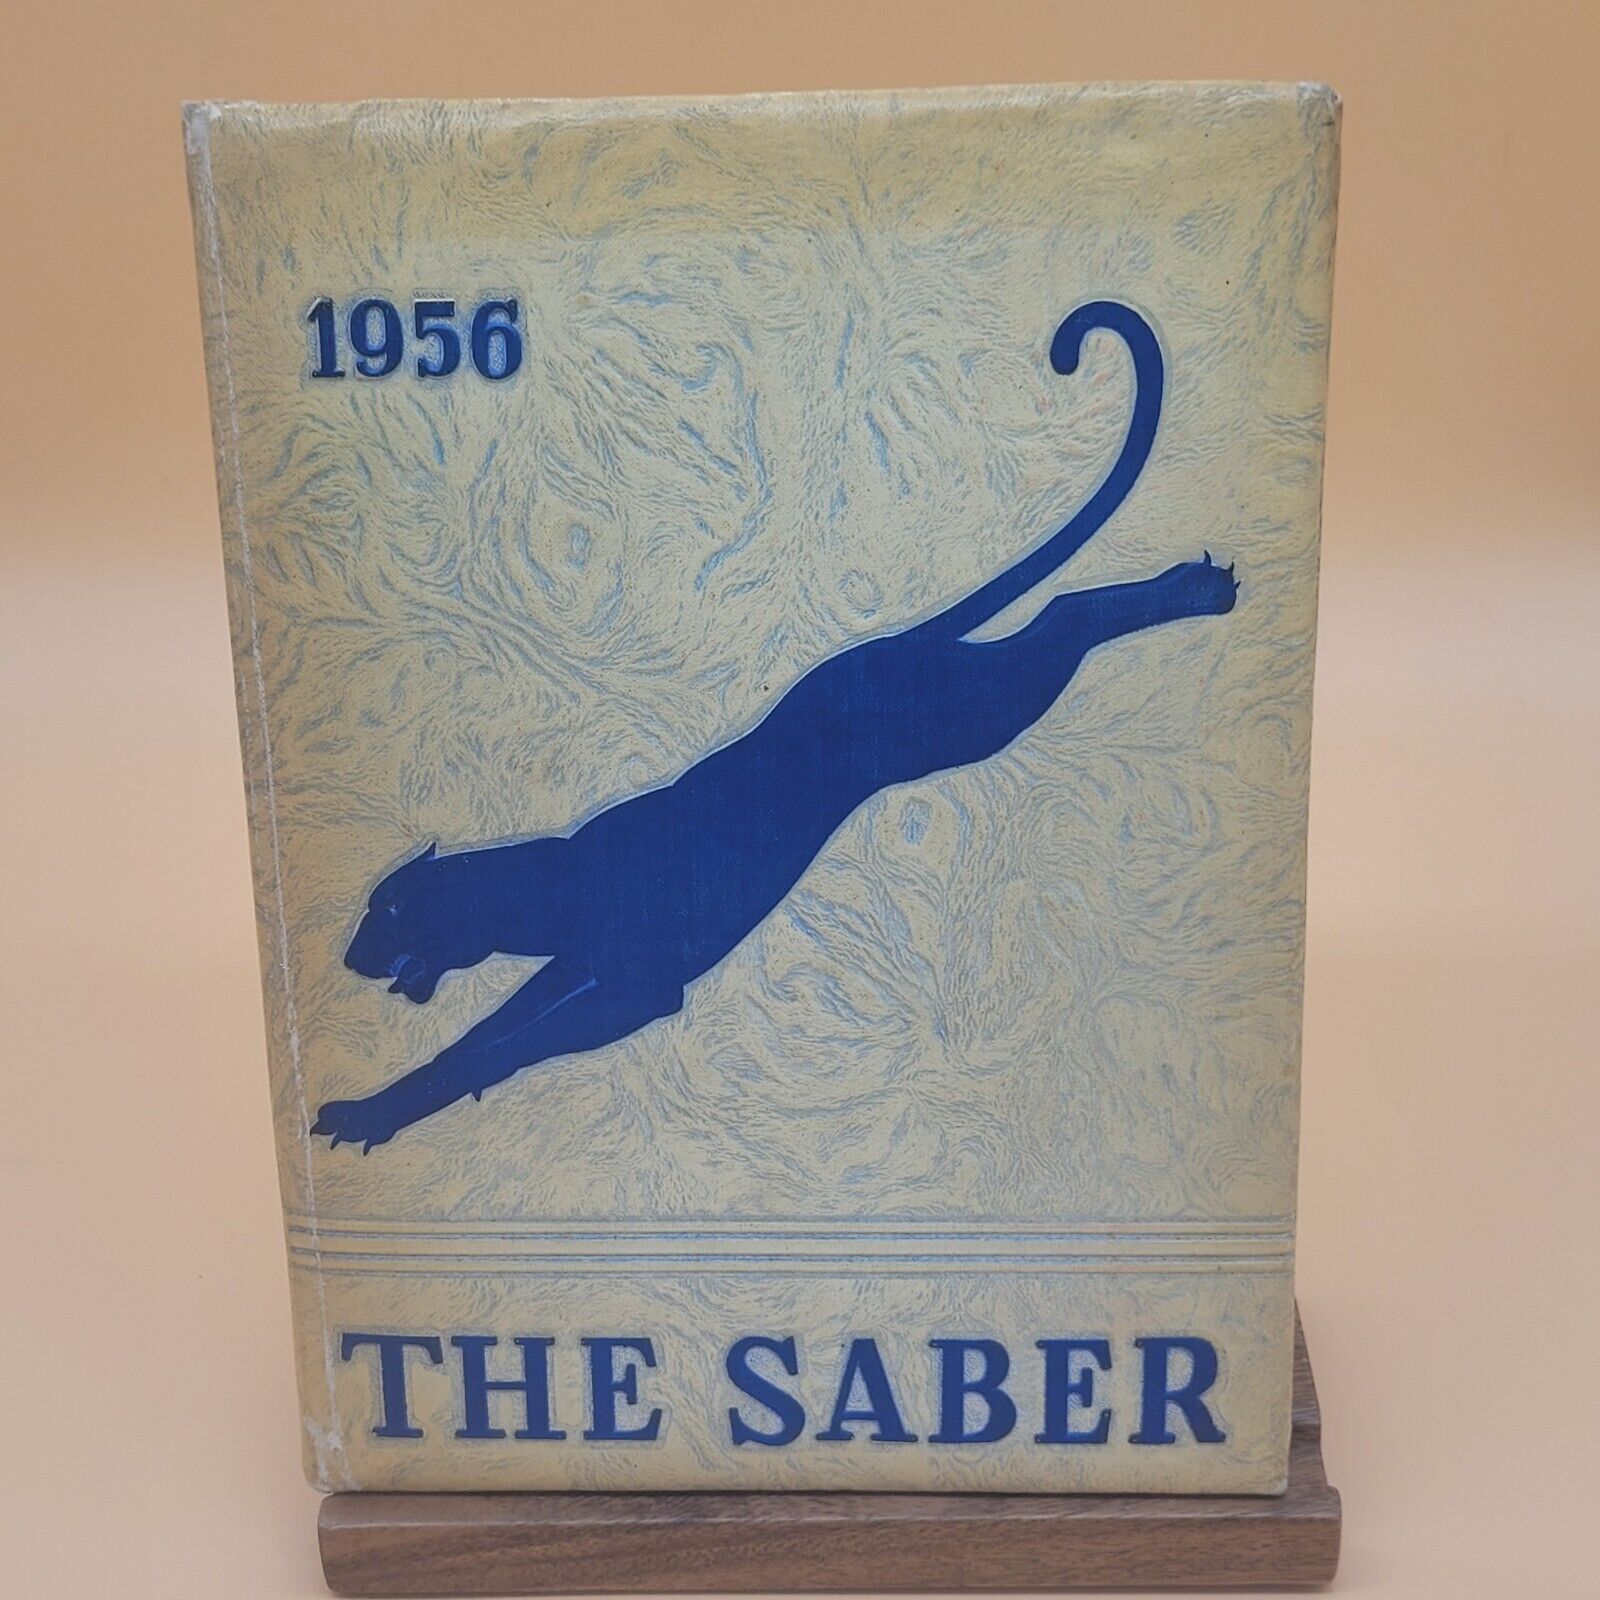 VTG 1956 THE SABER YEARBOOK SEWANEE MILITARY ACADEMY WRITTEN IN